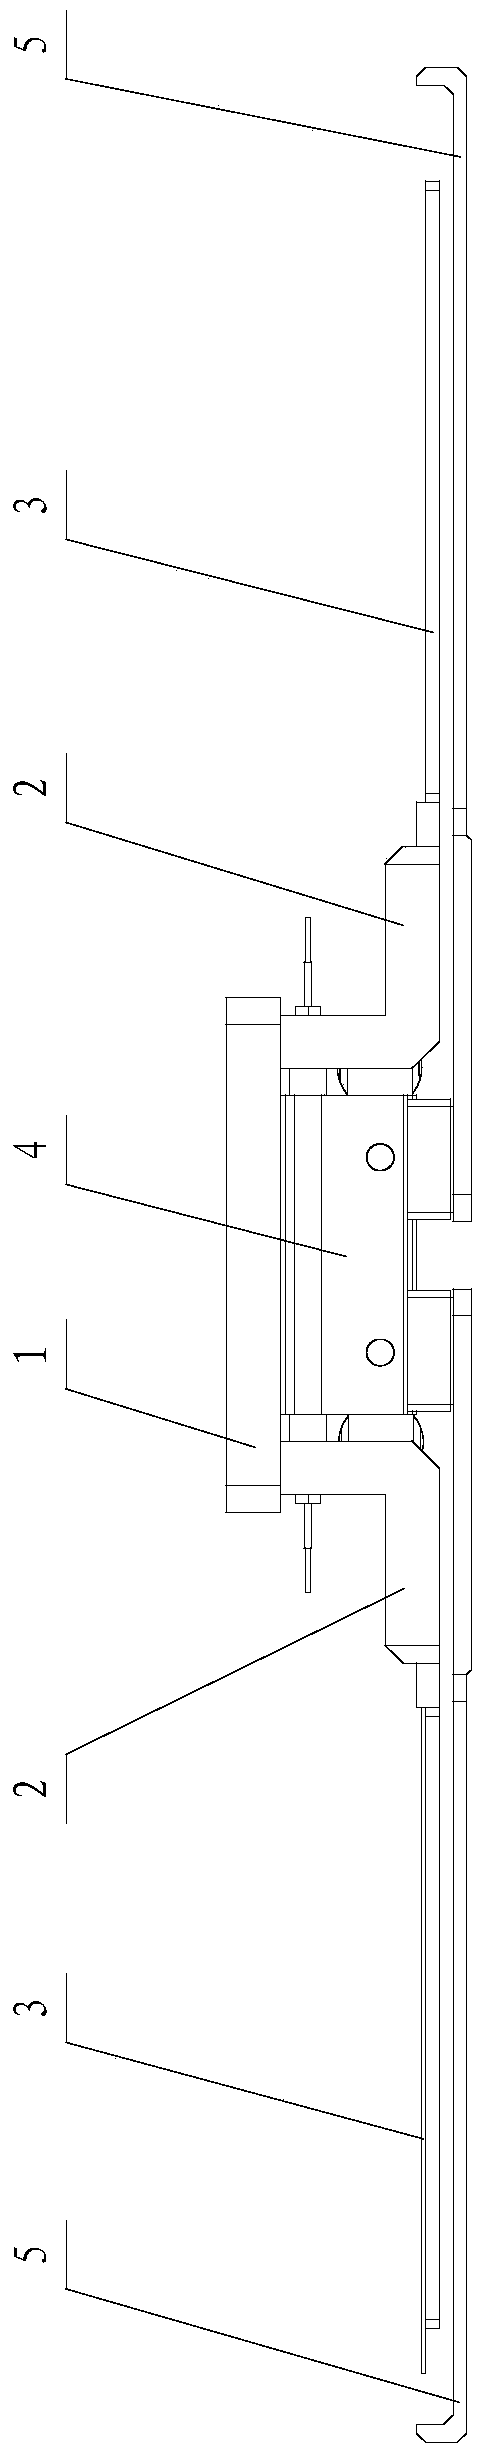 A clamping and conveying device for a square substrate with a hole